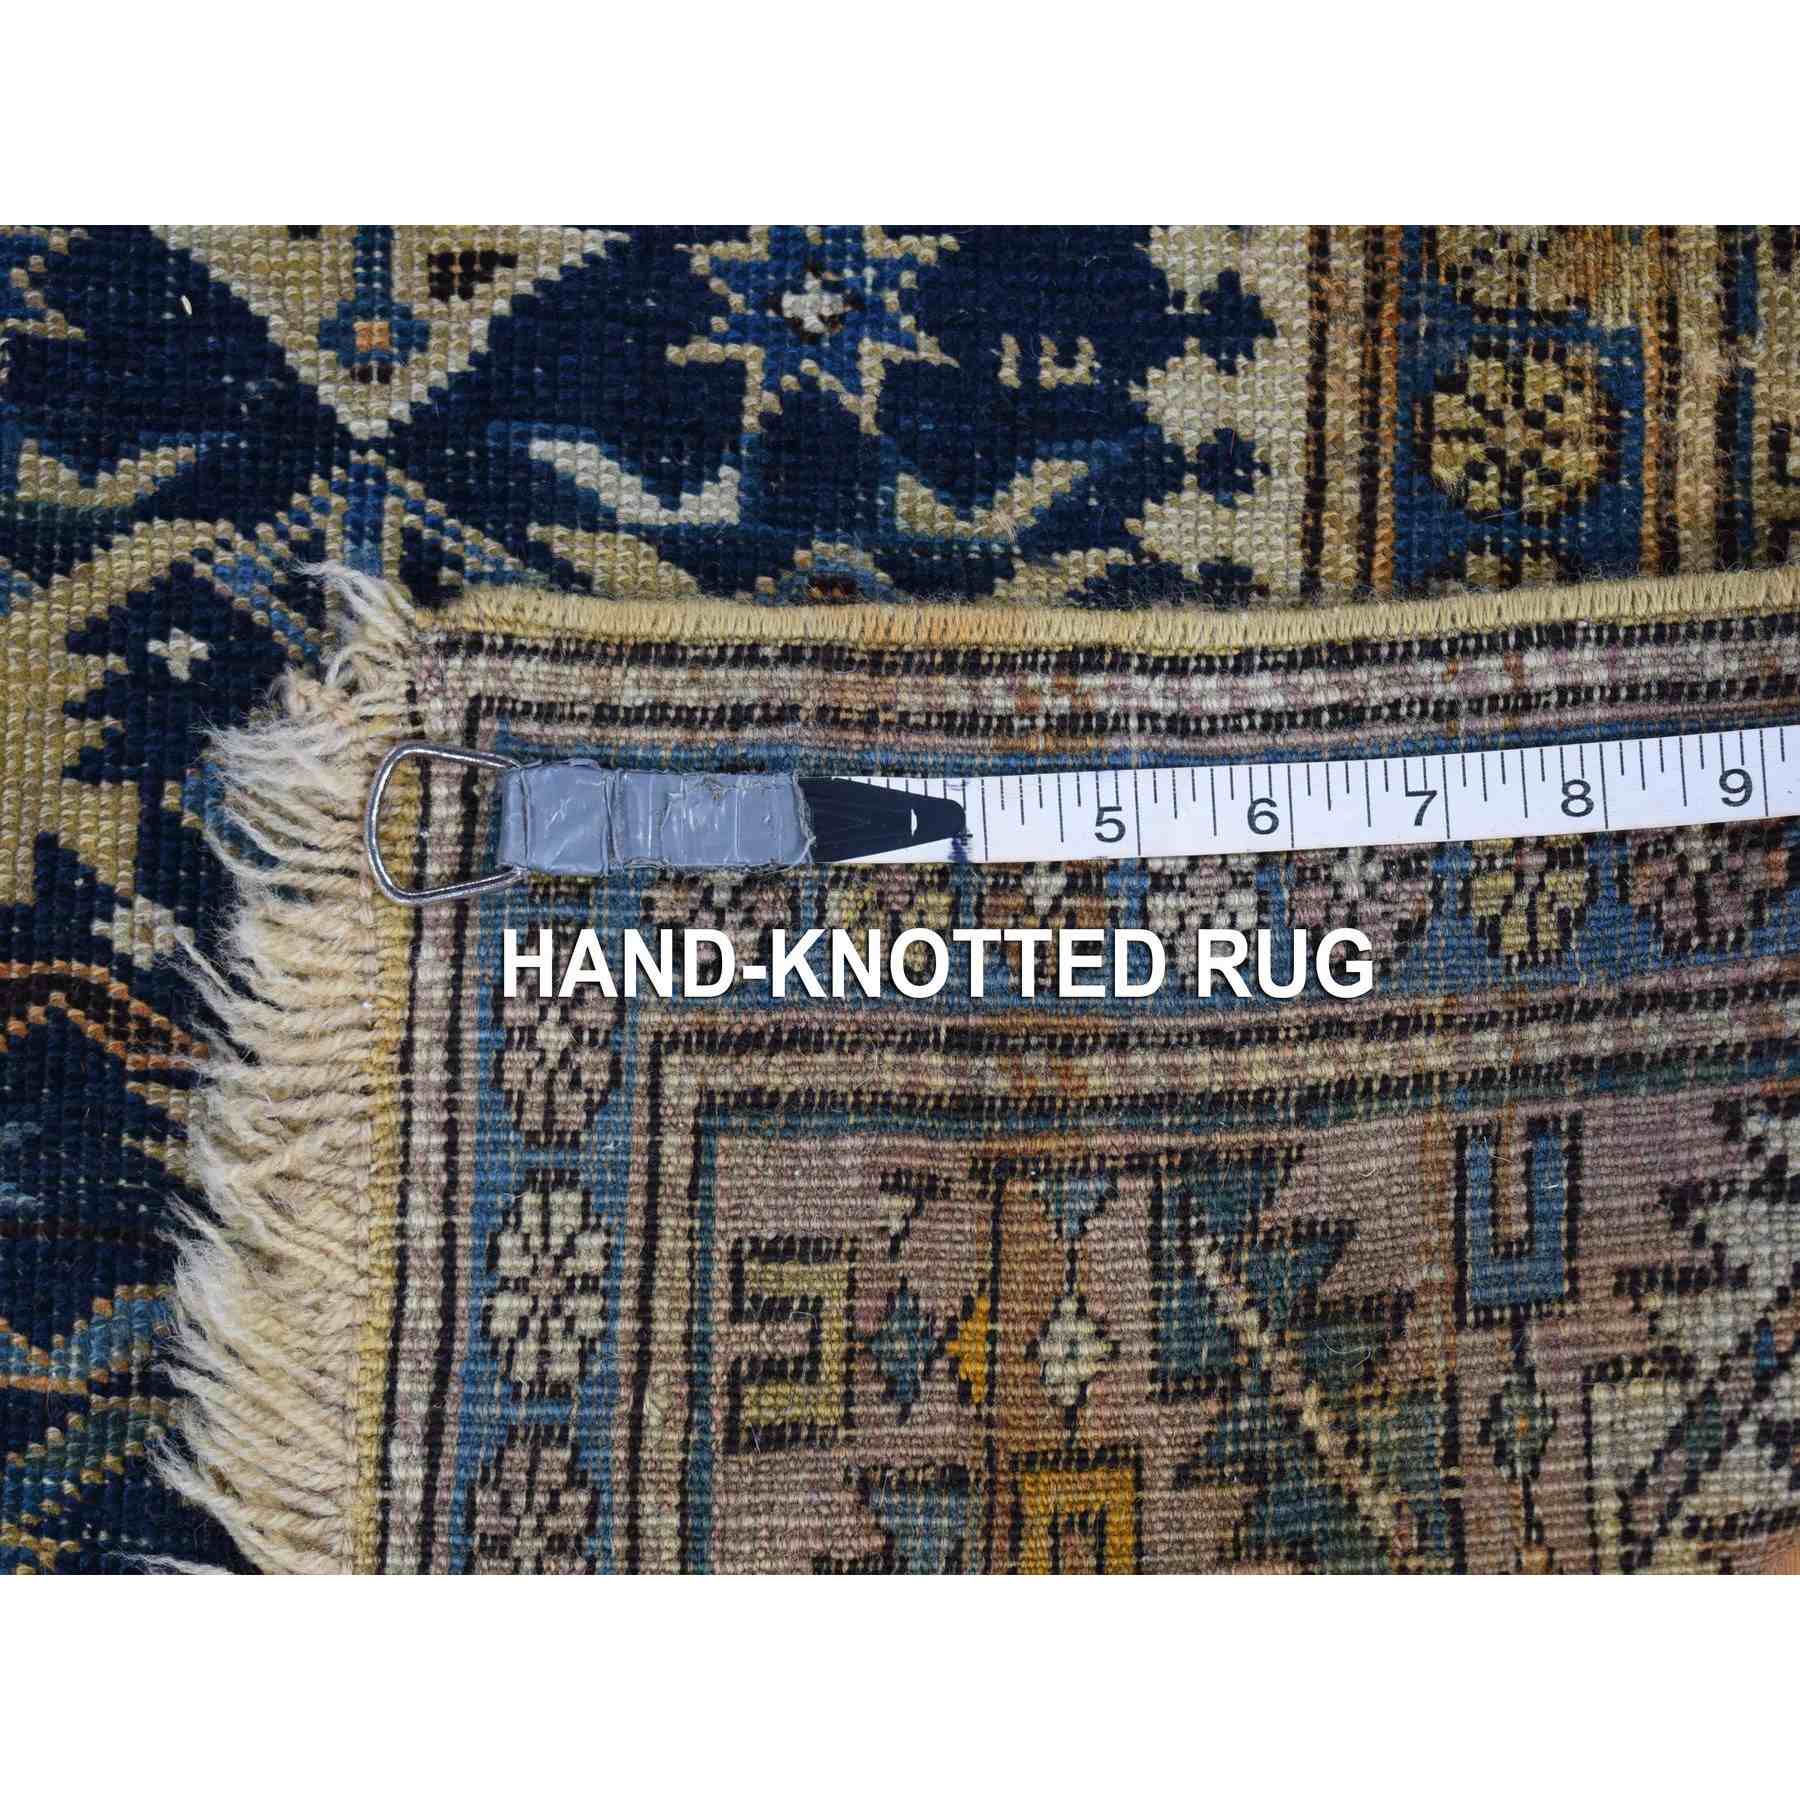 Antique-Hand-Knotted-Rug-400575